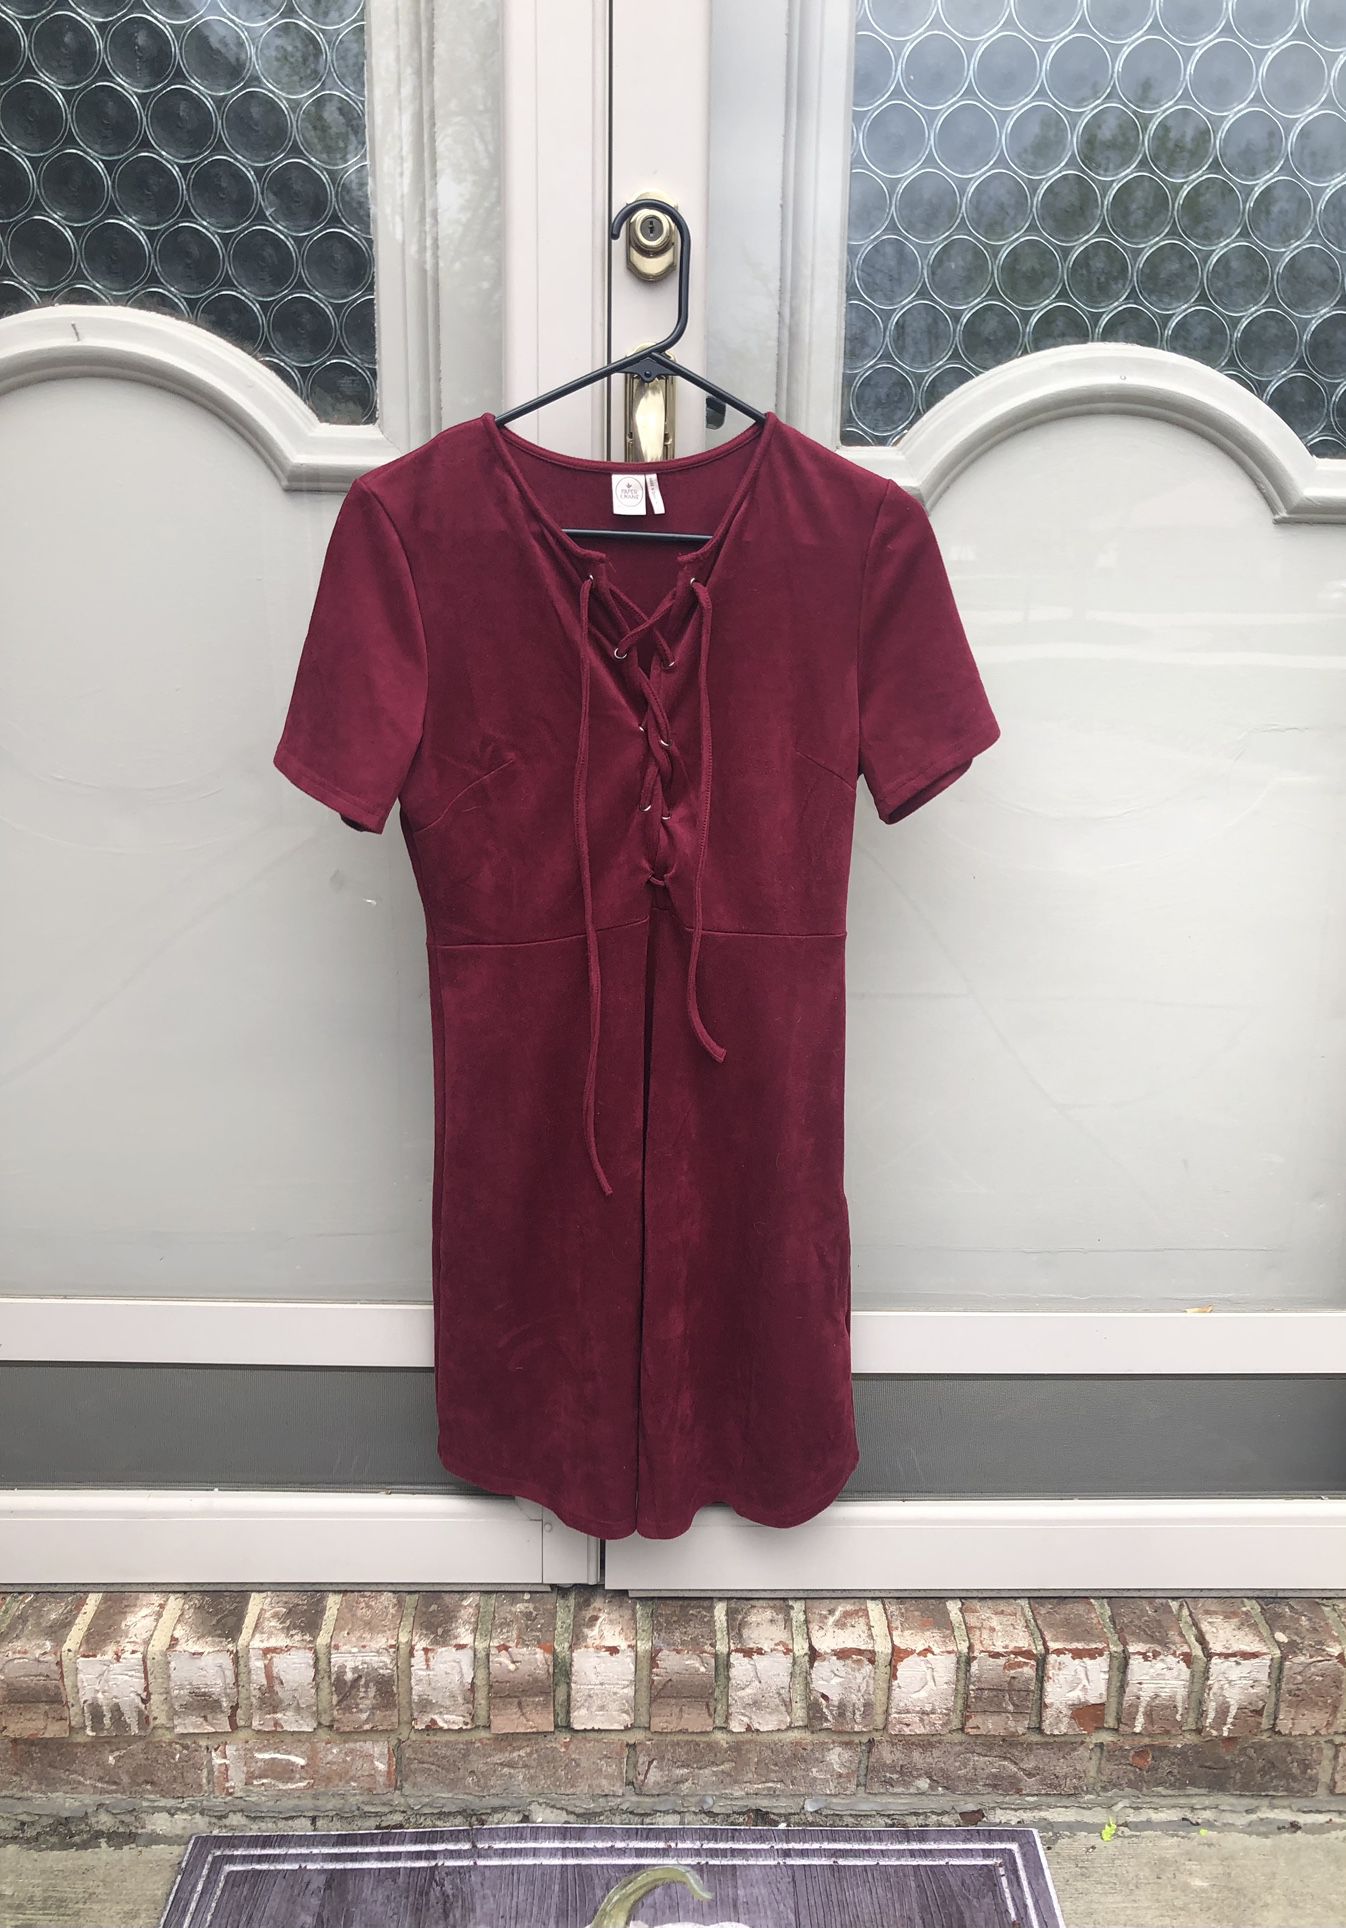 Microsuede Country-Chic Mini-Dress (Wine, M)